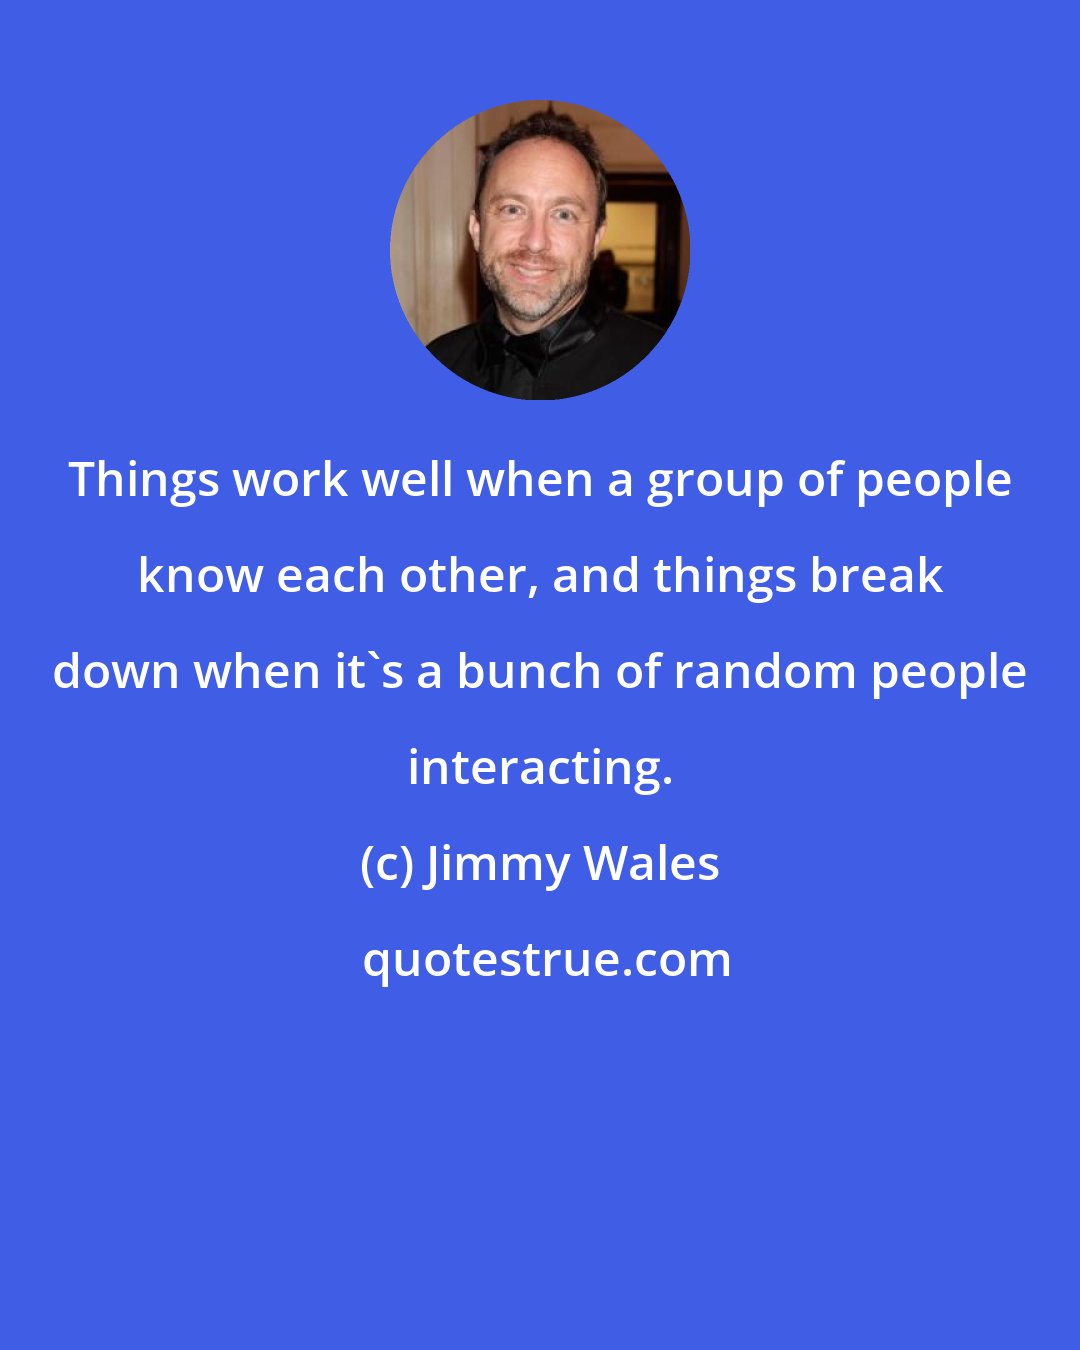 Jimmy Wales: Things work well when a group of people know each other, and things break down when it's a bunch of random people interacting.